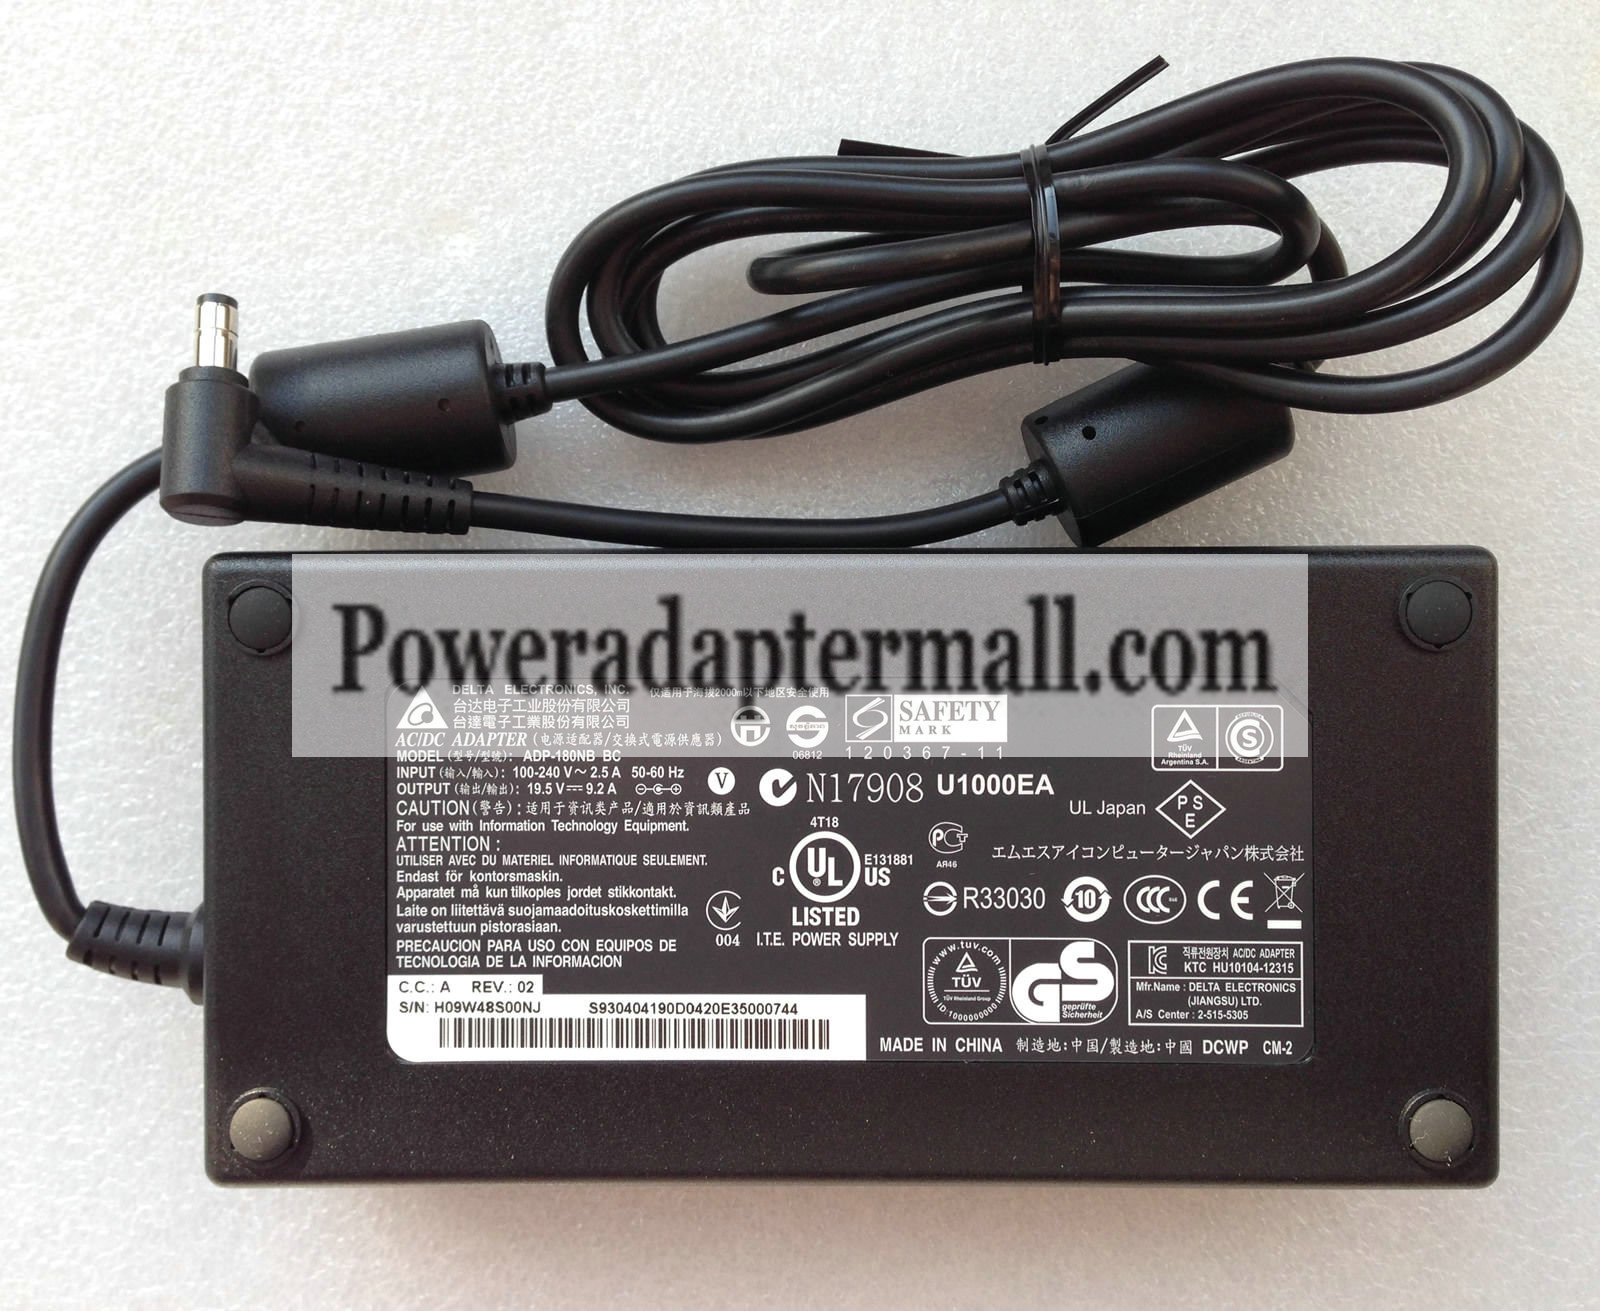 Original 19.5V 9.2A AC Adapter for MSI GT70 2OLWS-822US Mobile